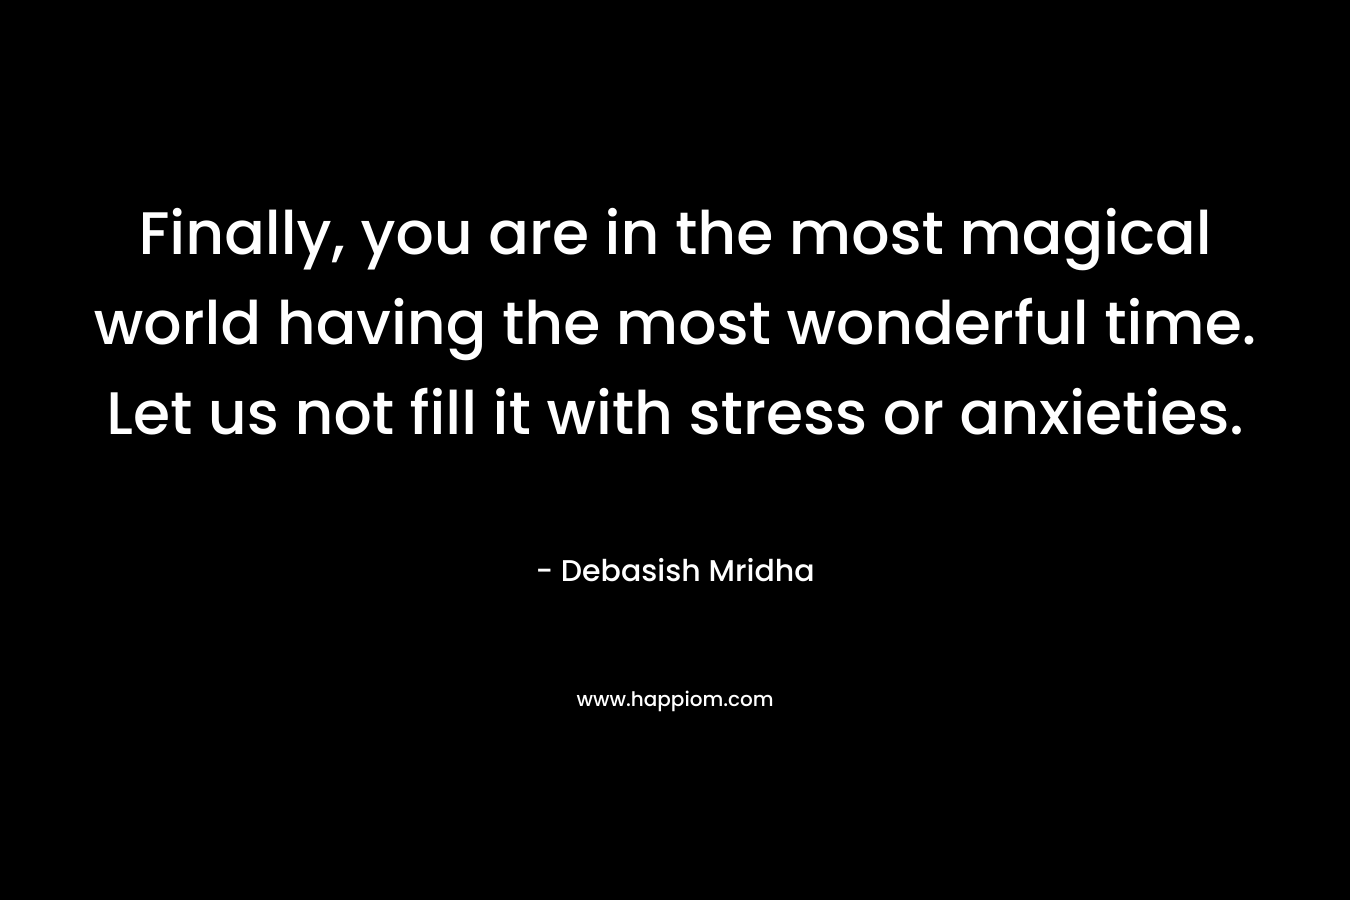 Finally, you are in the most magical world having the most wonderful time. Let us not fill it with stress or anxieties. – Debasish Mridha